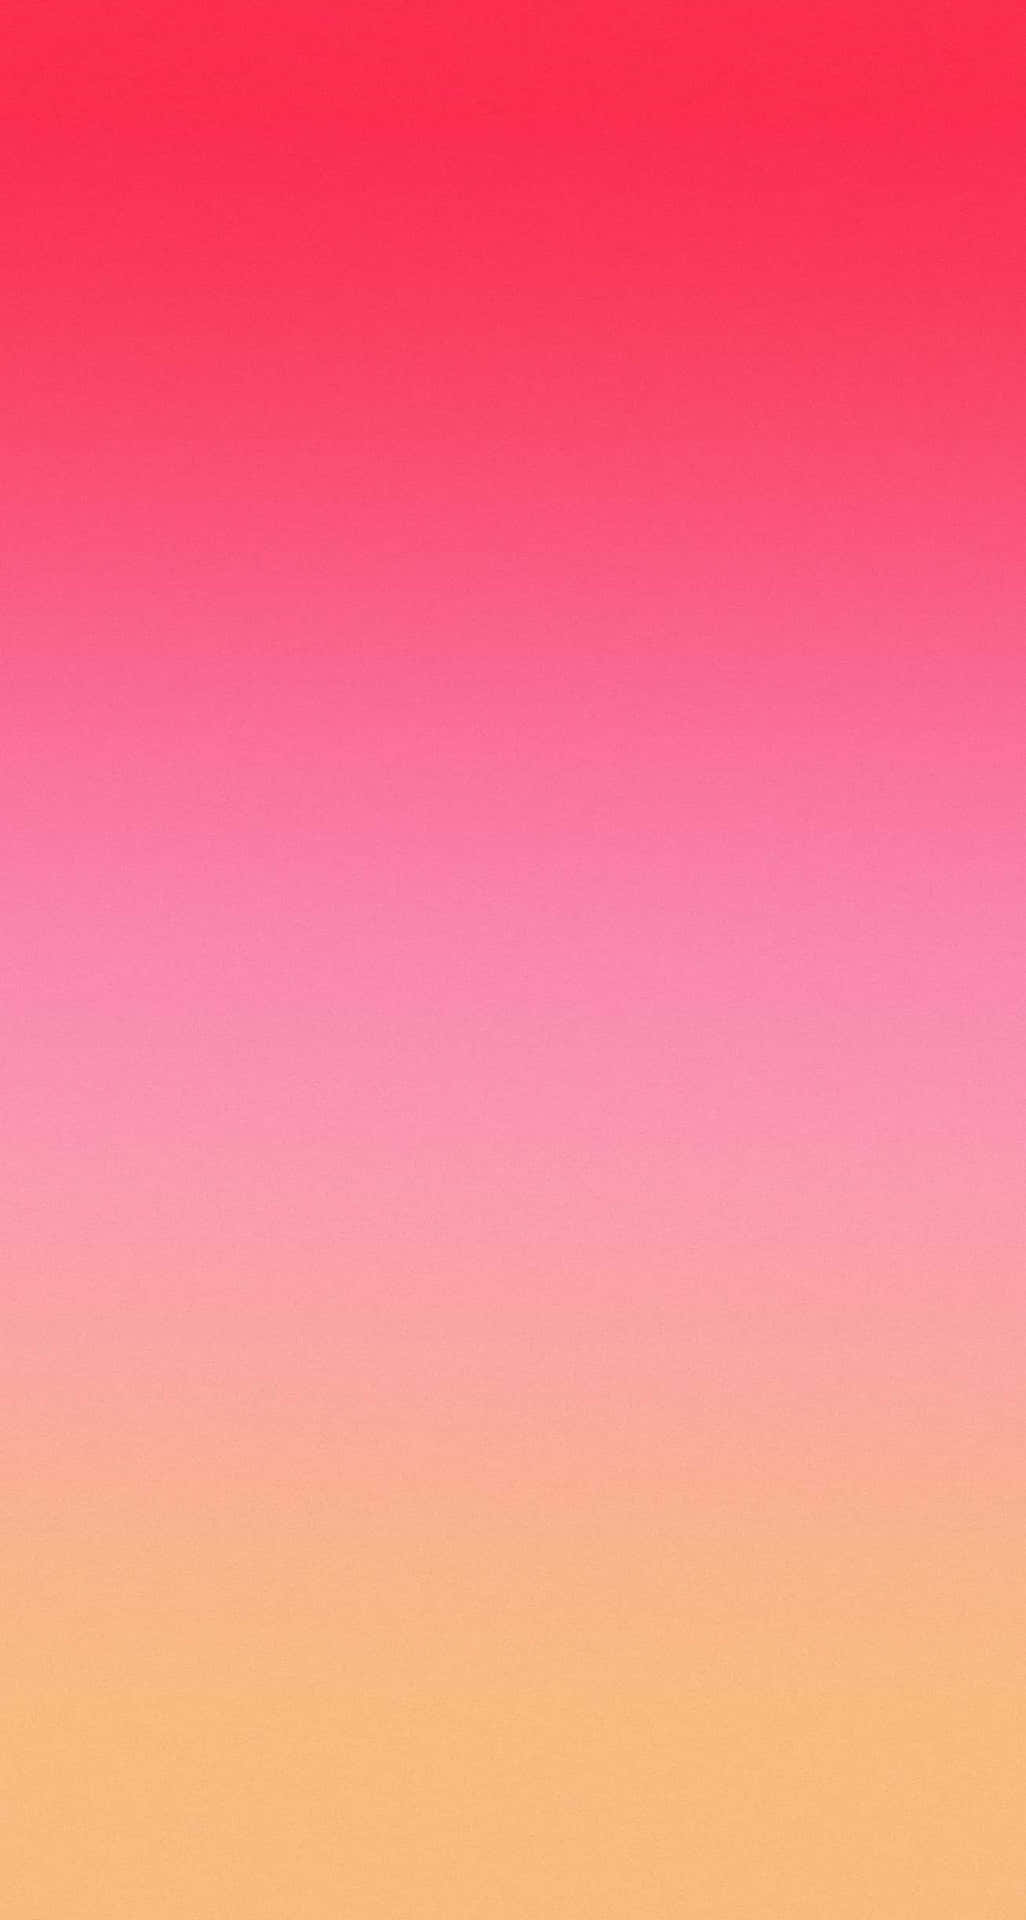 Pink Ombre Background 1308 X 2448